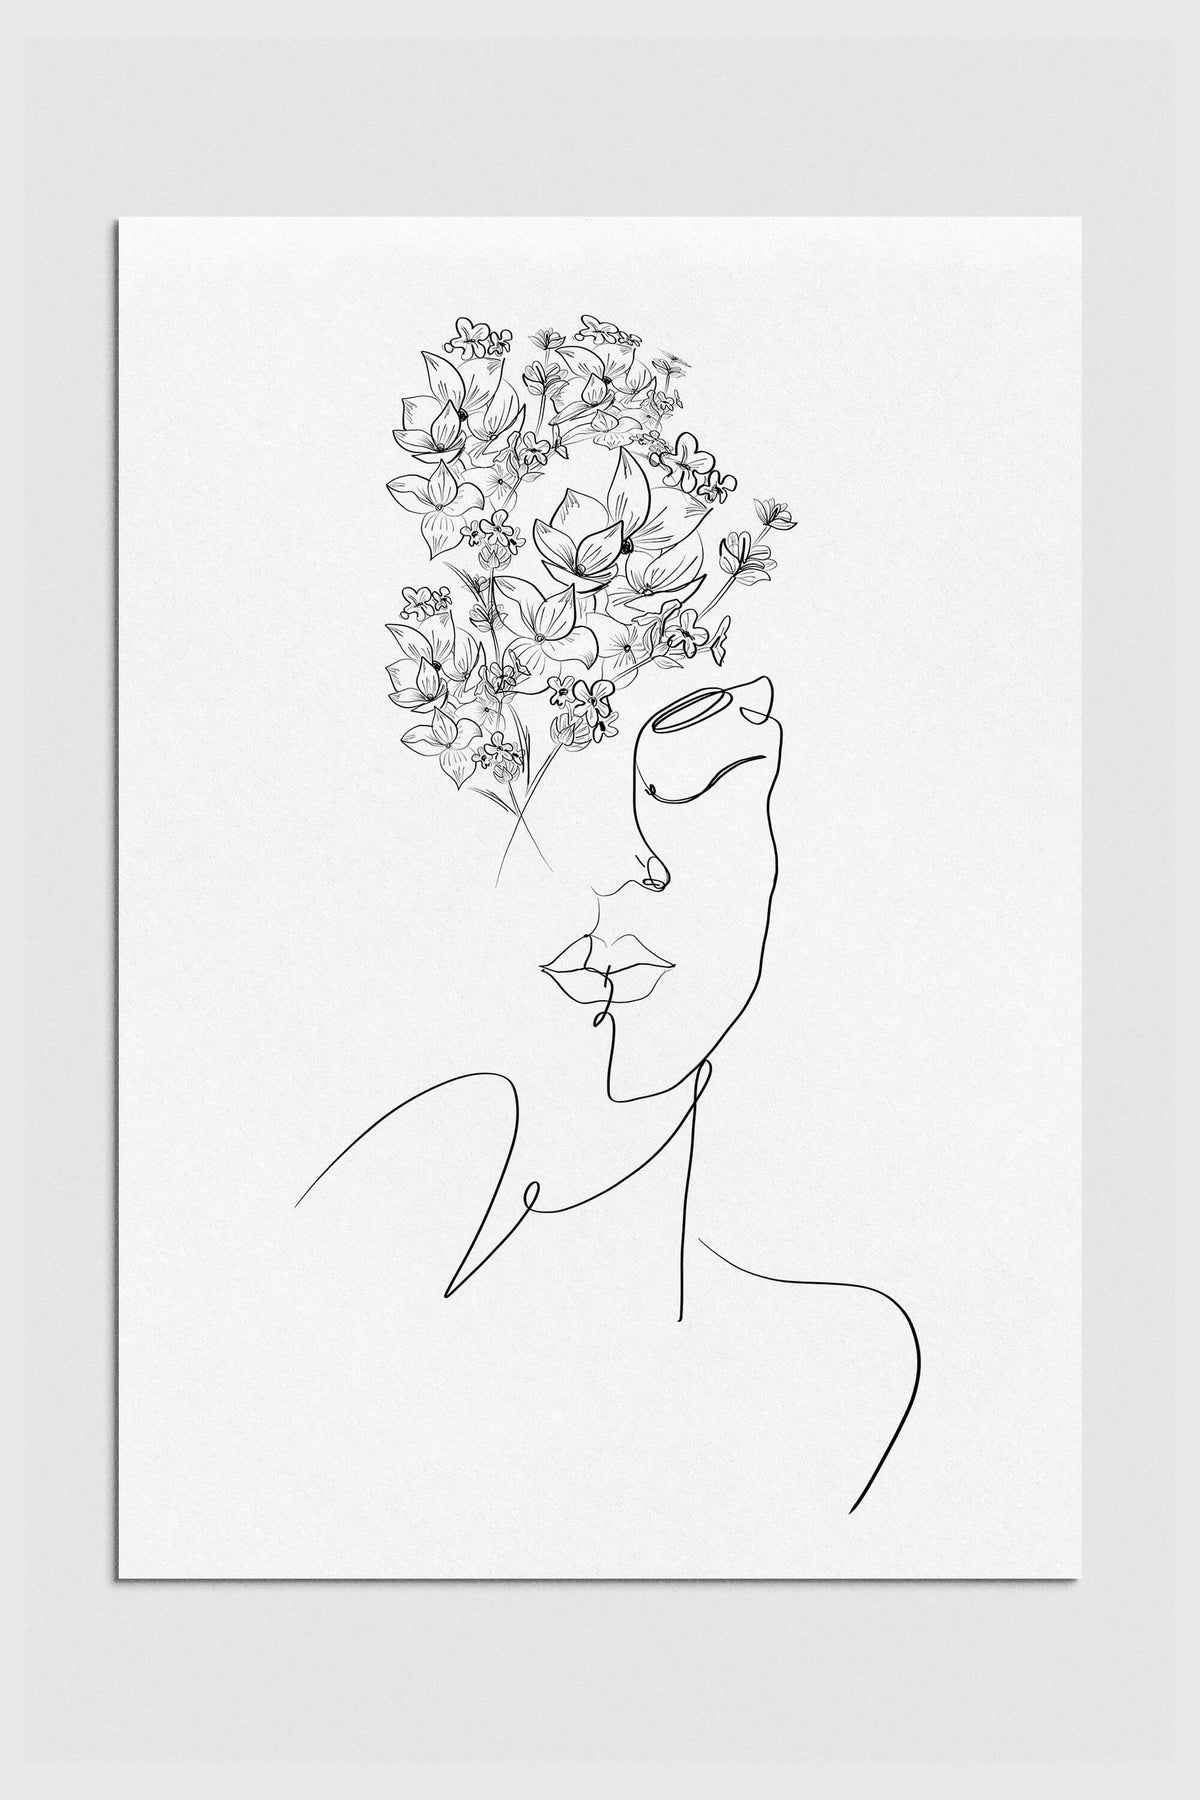 Modern feminine floral head woman portrait art print in chic black and white style, featuring intricate details of flowers and elegant lines - ideal for sophisticated home decor.